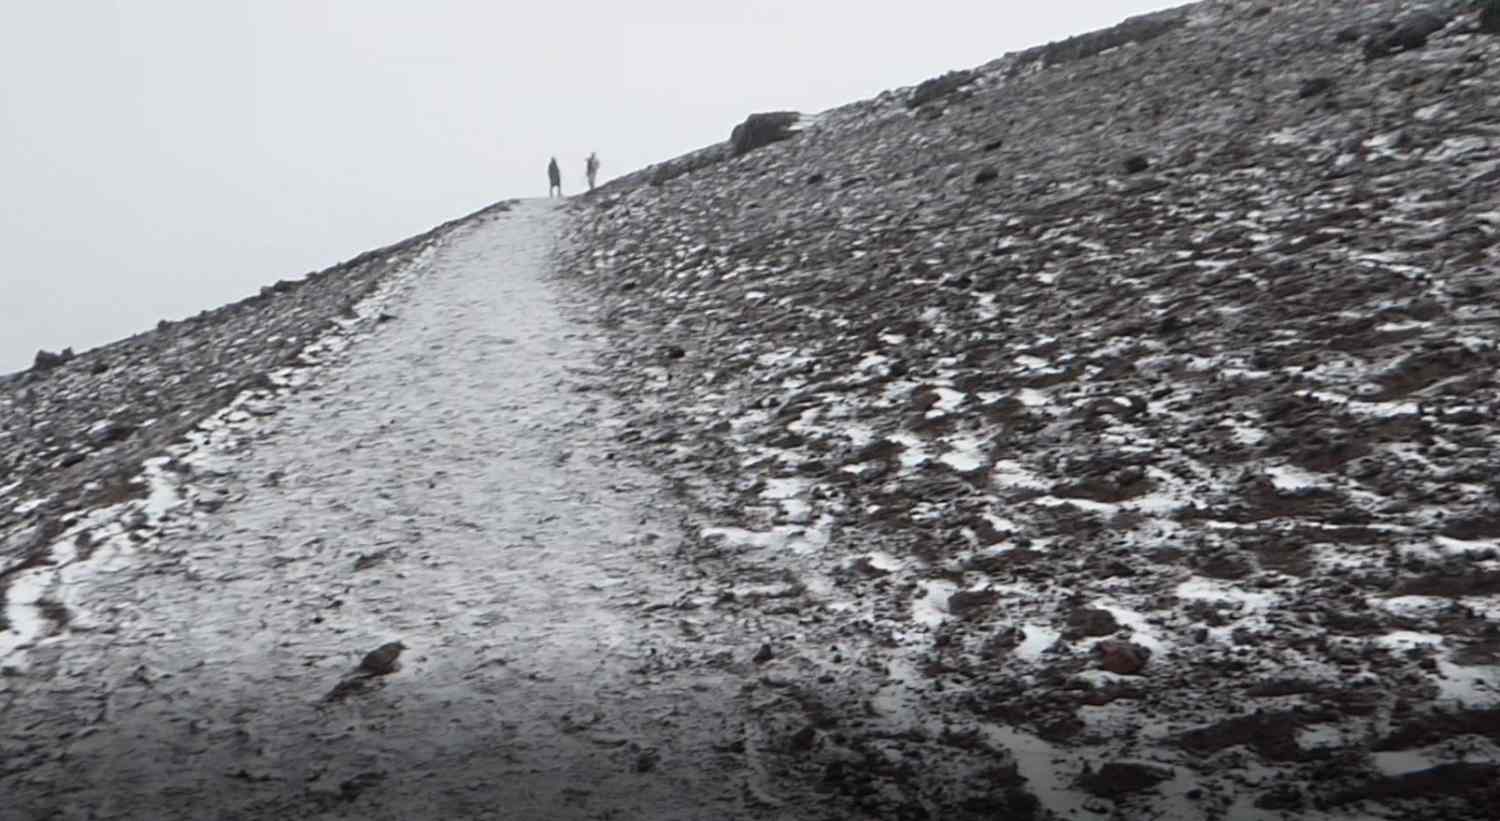 Snow and ice at Ascent to the top of the Cotopaxi